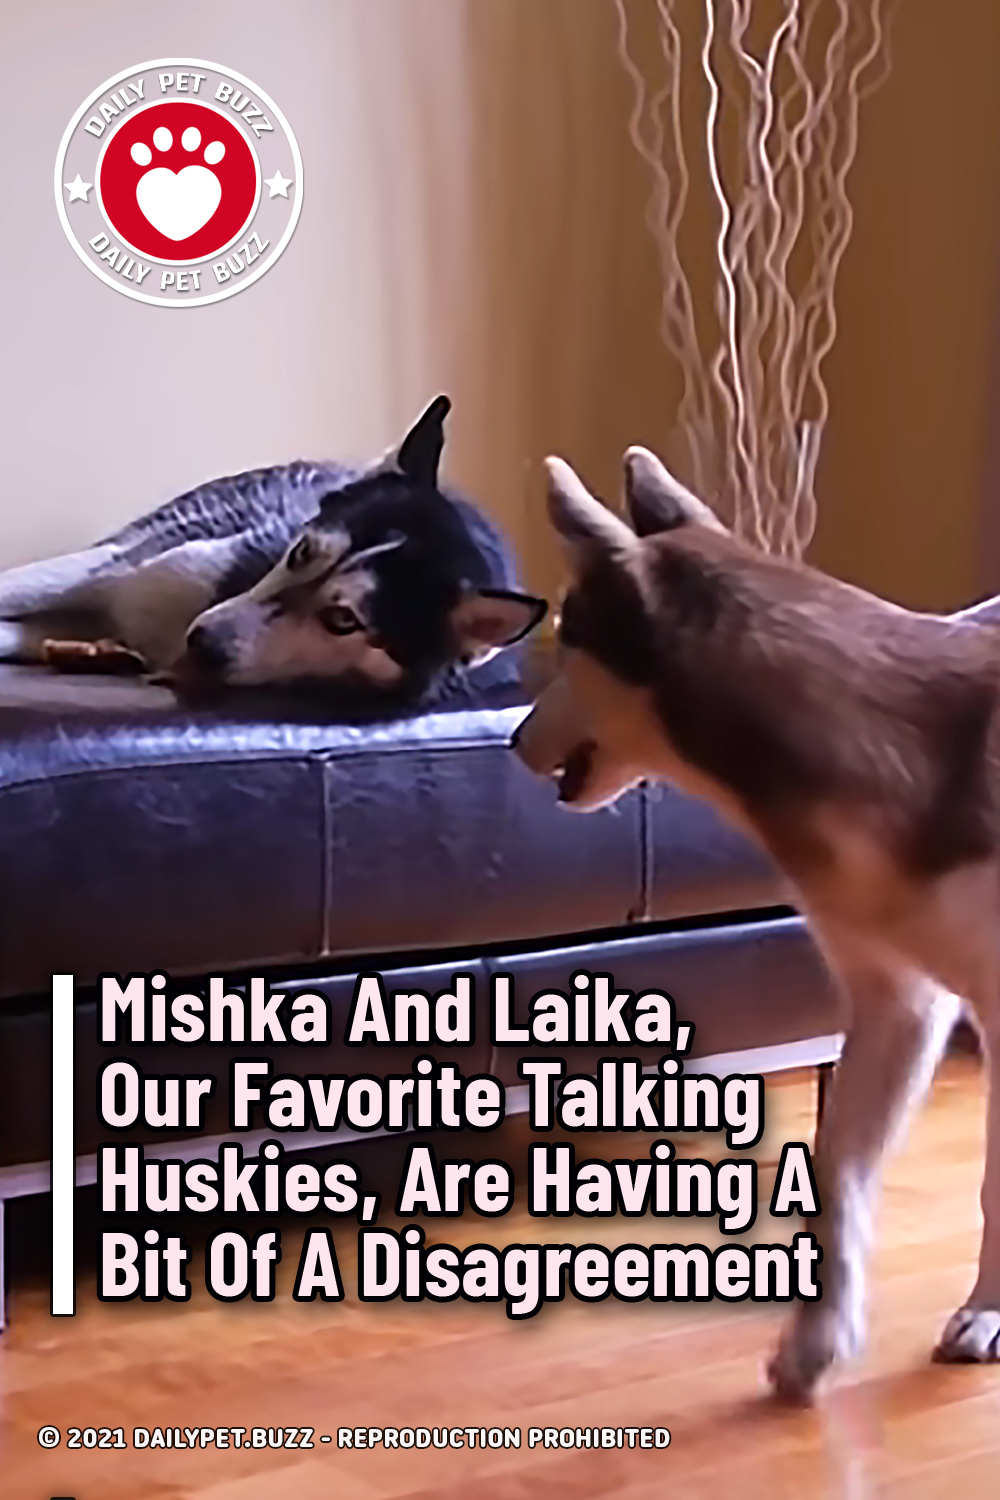 Mishka And Laika, Our Favorite Talking Huskies, Are Having A Bit Of A Disagreement